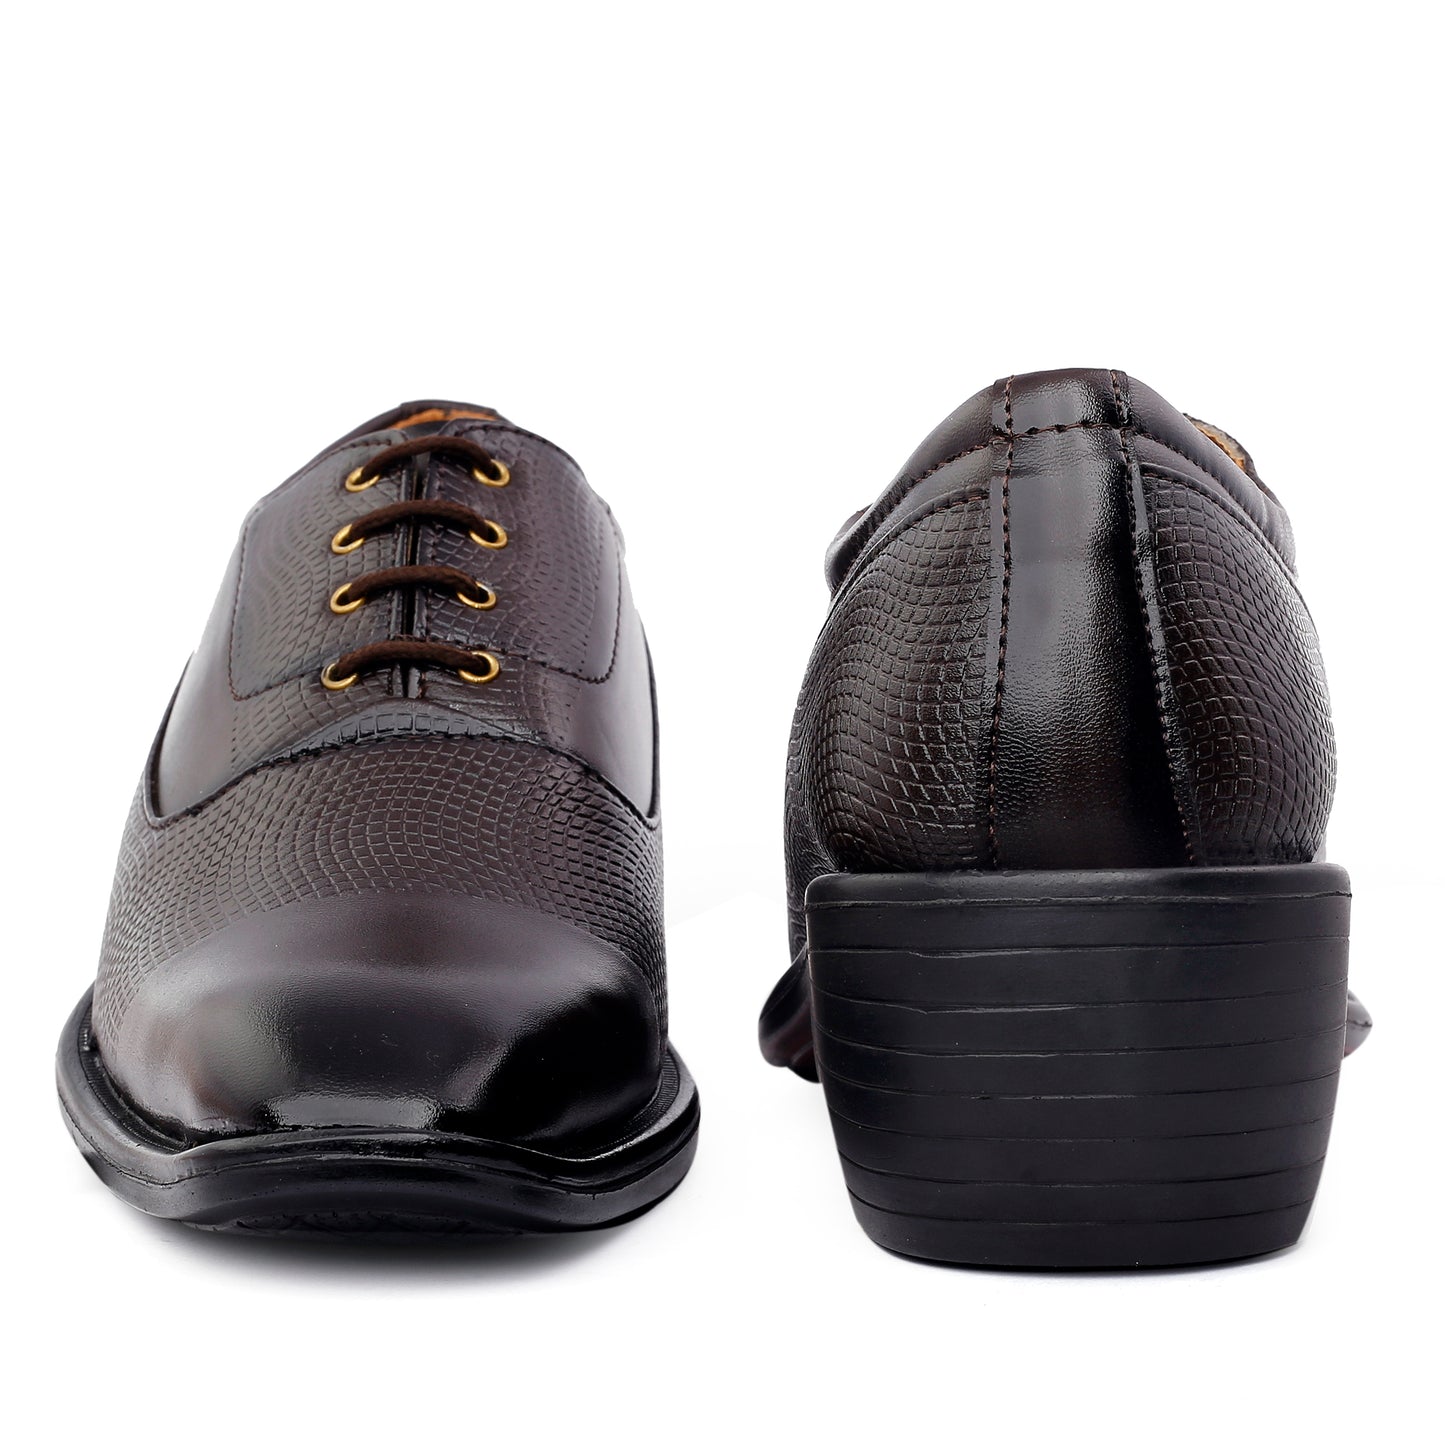 Bxxy's Faux Leather Party Wear Lace-up Shoes for Men